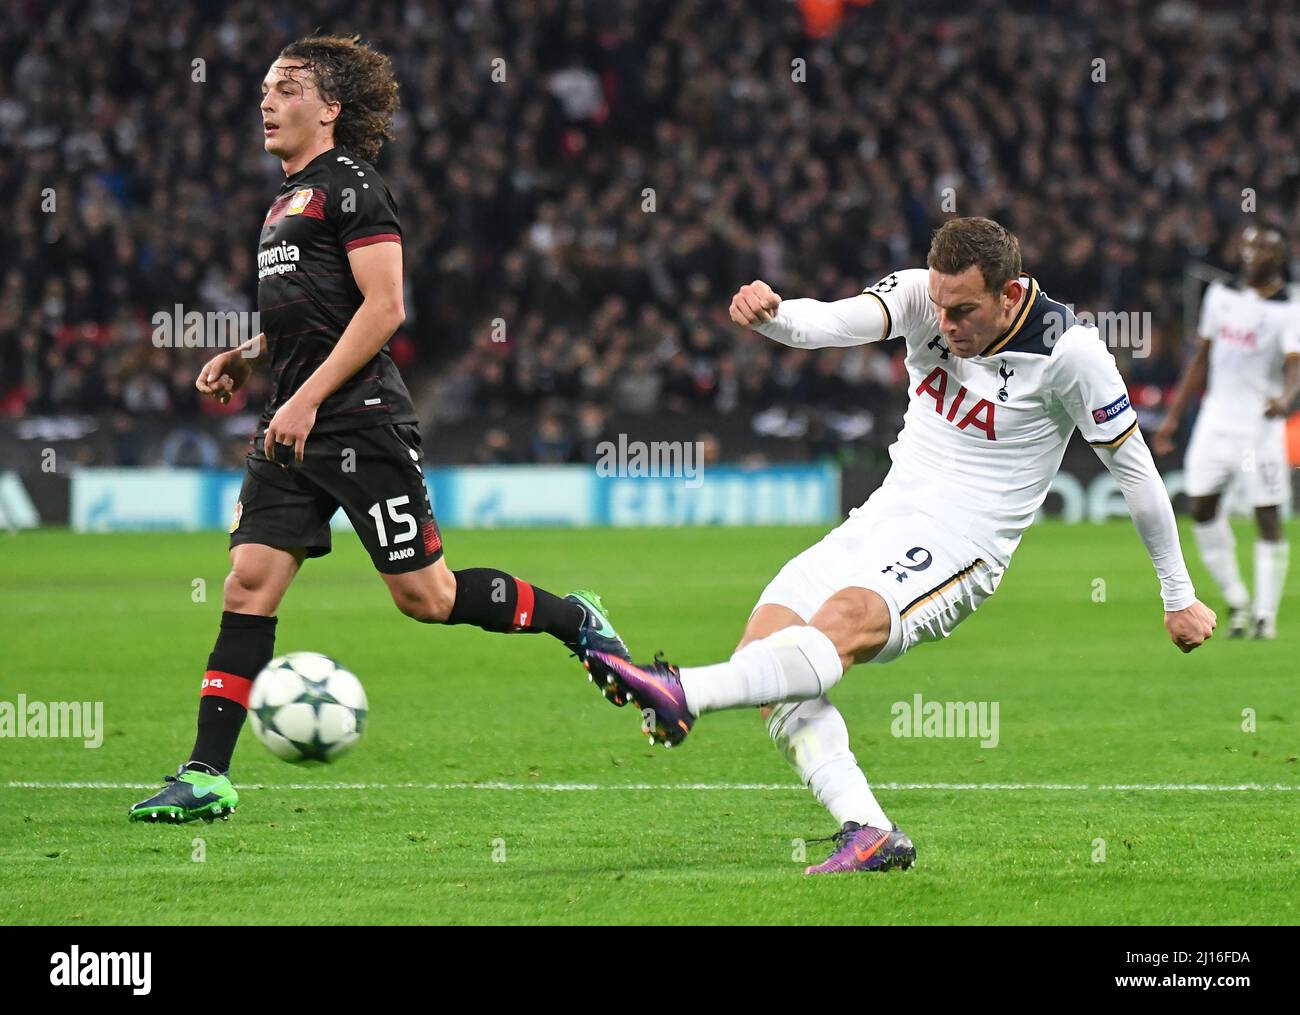 LONDON, ENGLAND - NOVEMBER 2, 2016: Julian Baumgartlinger (L) of Leverkusen and Vincent Janssen (R) of Tottenham pictured in action during the UEFA Champions League Group E game between Tottenham Hotspur and Bayern Leverkusen at Wembley Stadium. Copyright: Cosmin Iftode/Picstaff Stock Photo